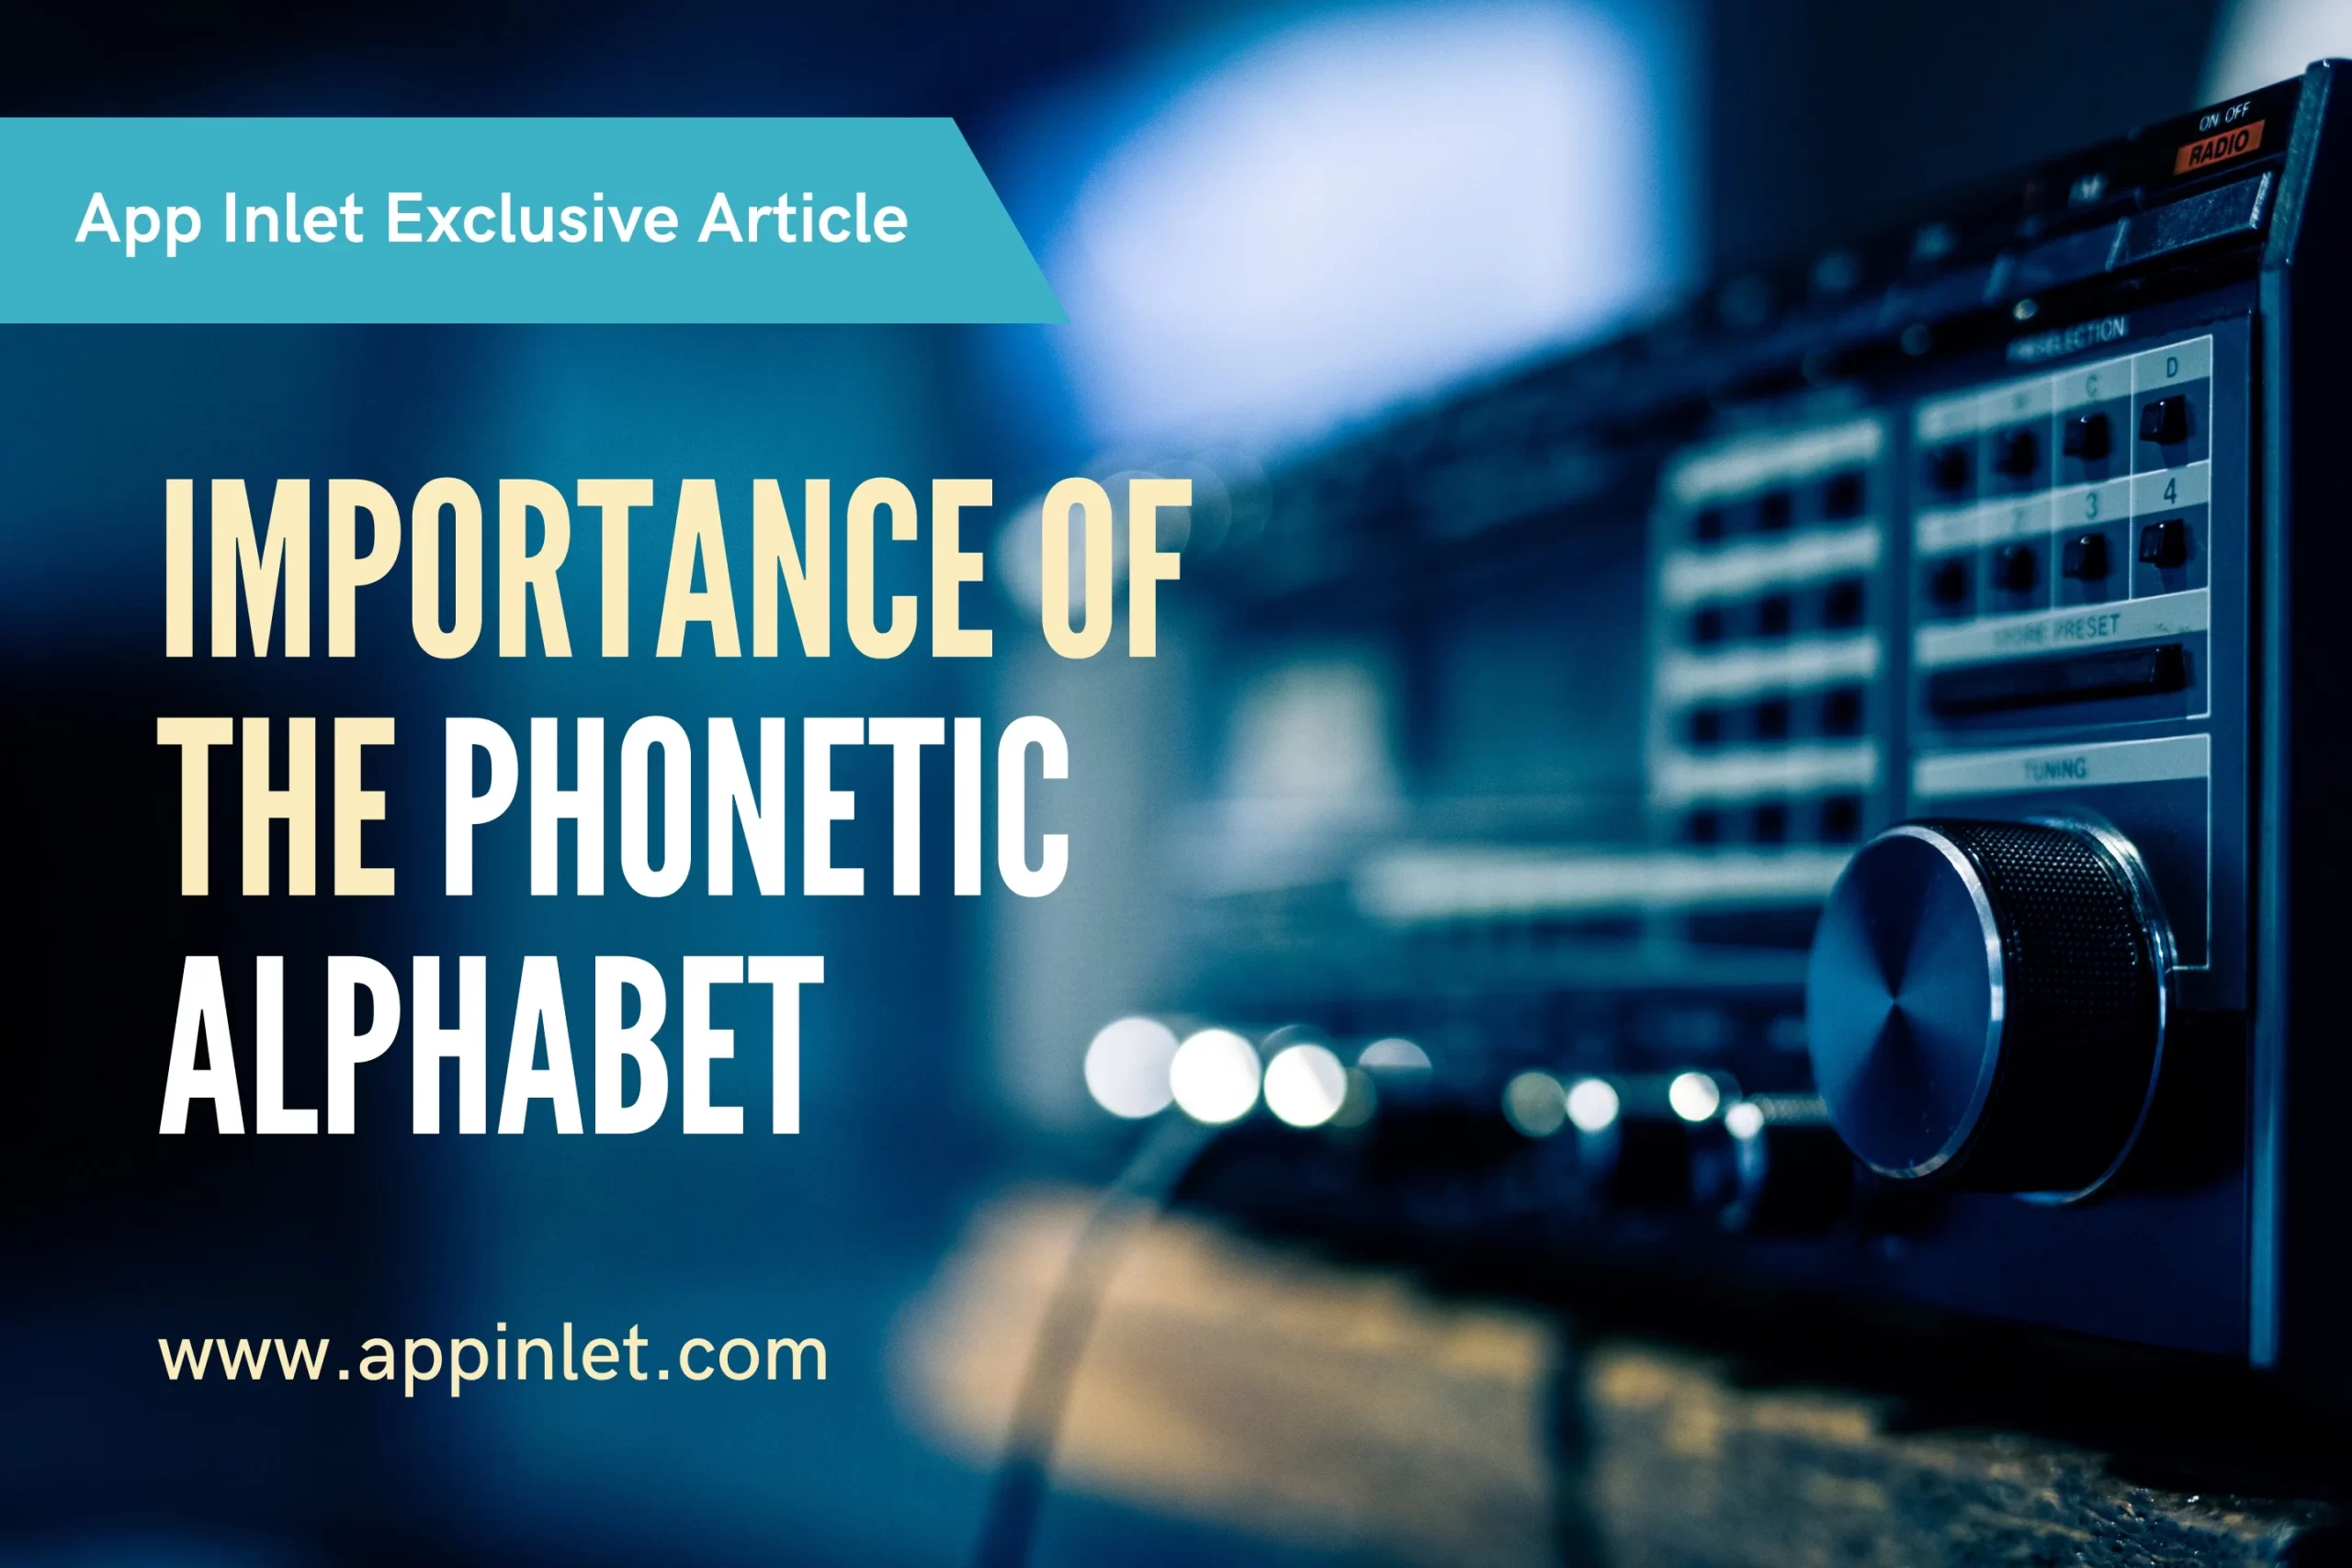 What is the importance of the Phonetic Alphabet?